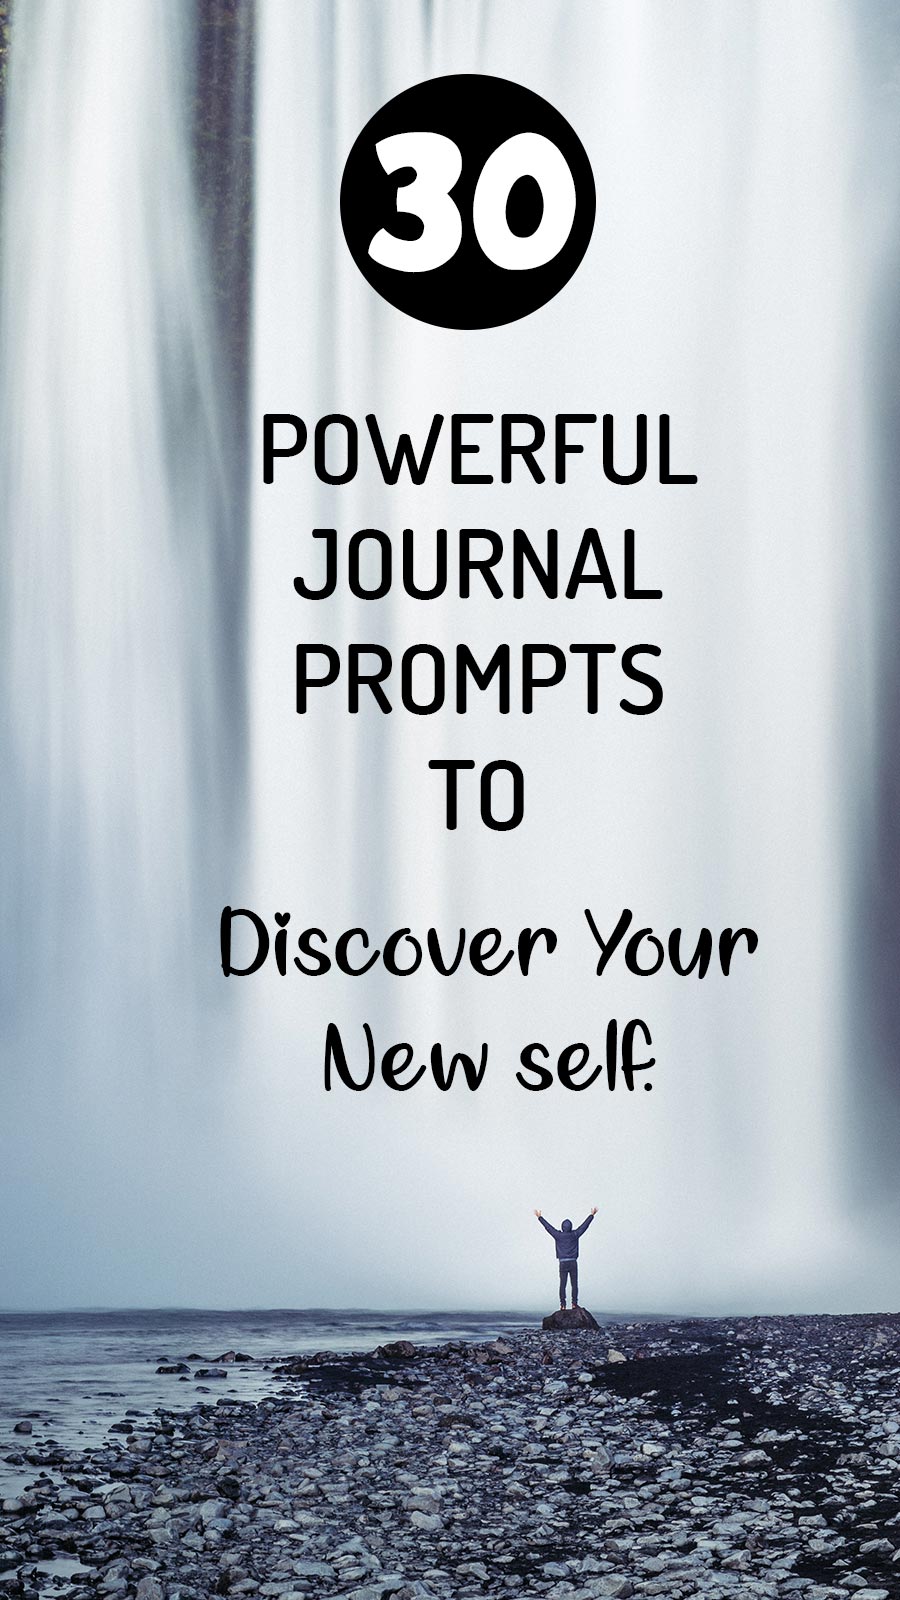 Discover your new self with these powerful journal prompts. These 30 journal prompts for self-discovery will take you to the new path and help you figure out your best versions and new self-worth